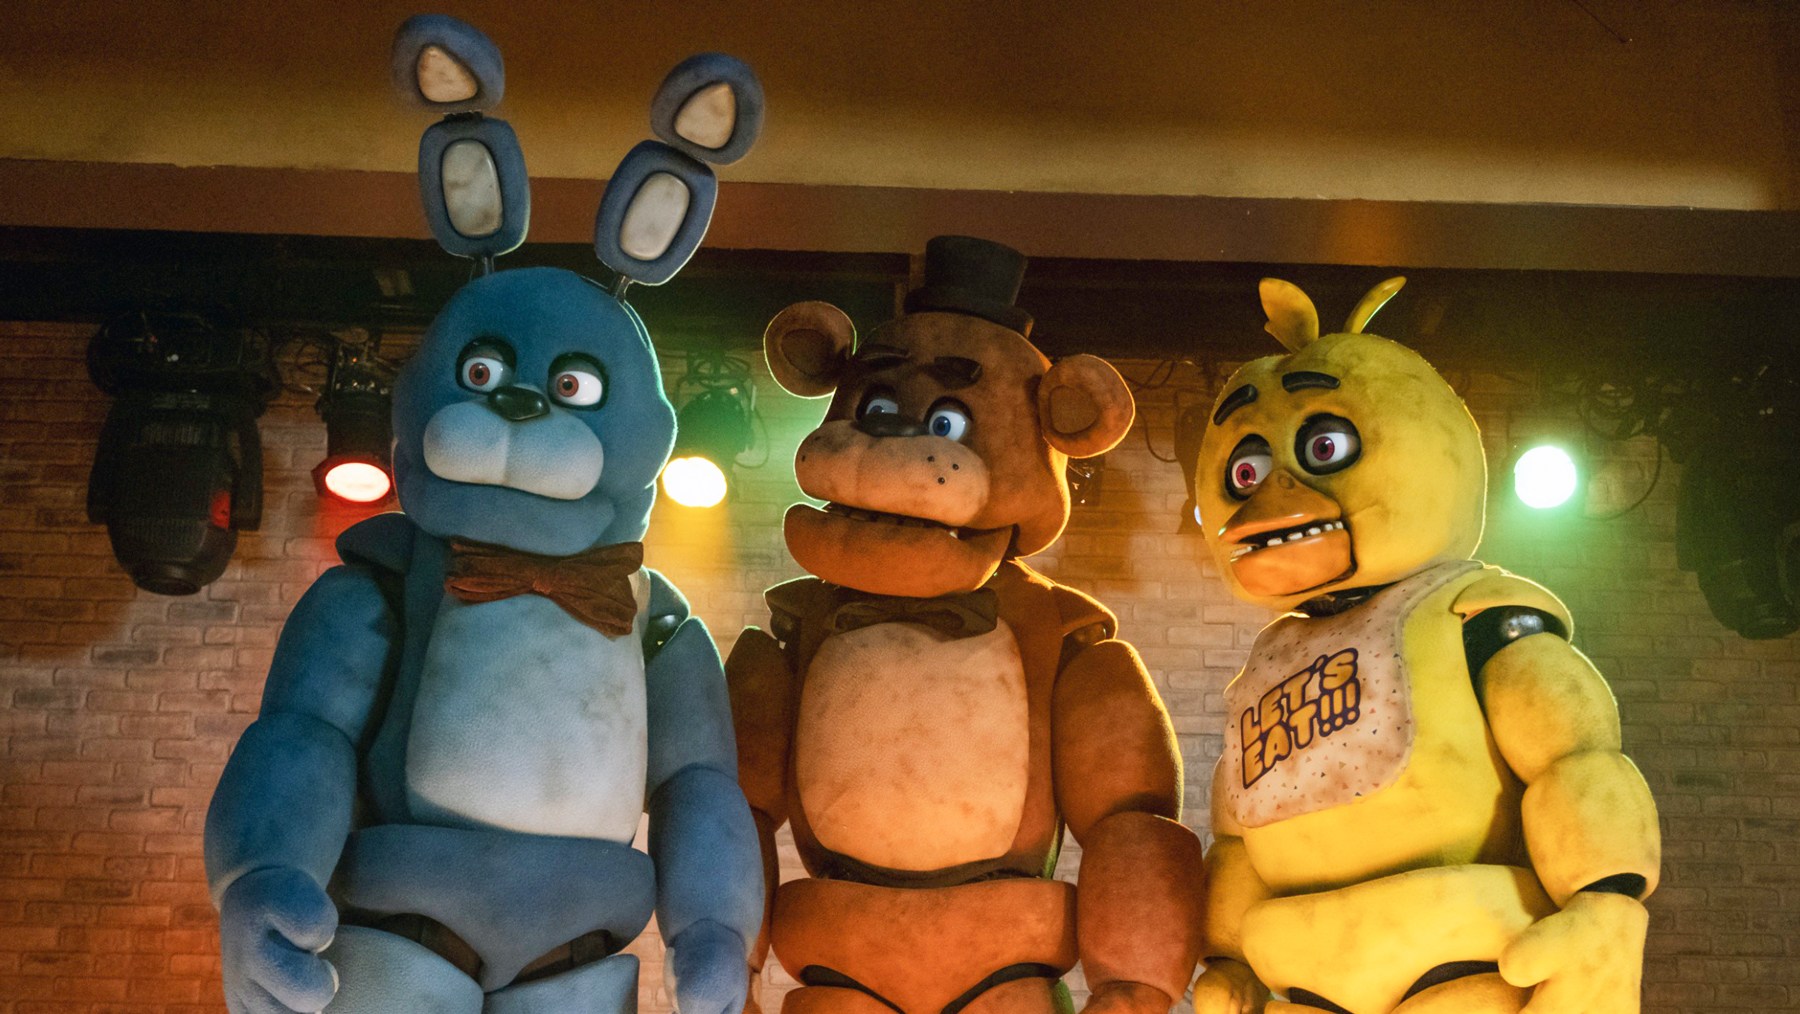 annemarie tate share images of five nights at freddys photos